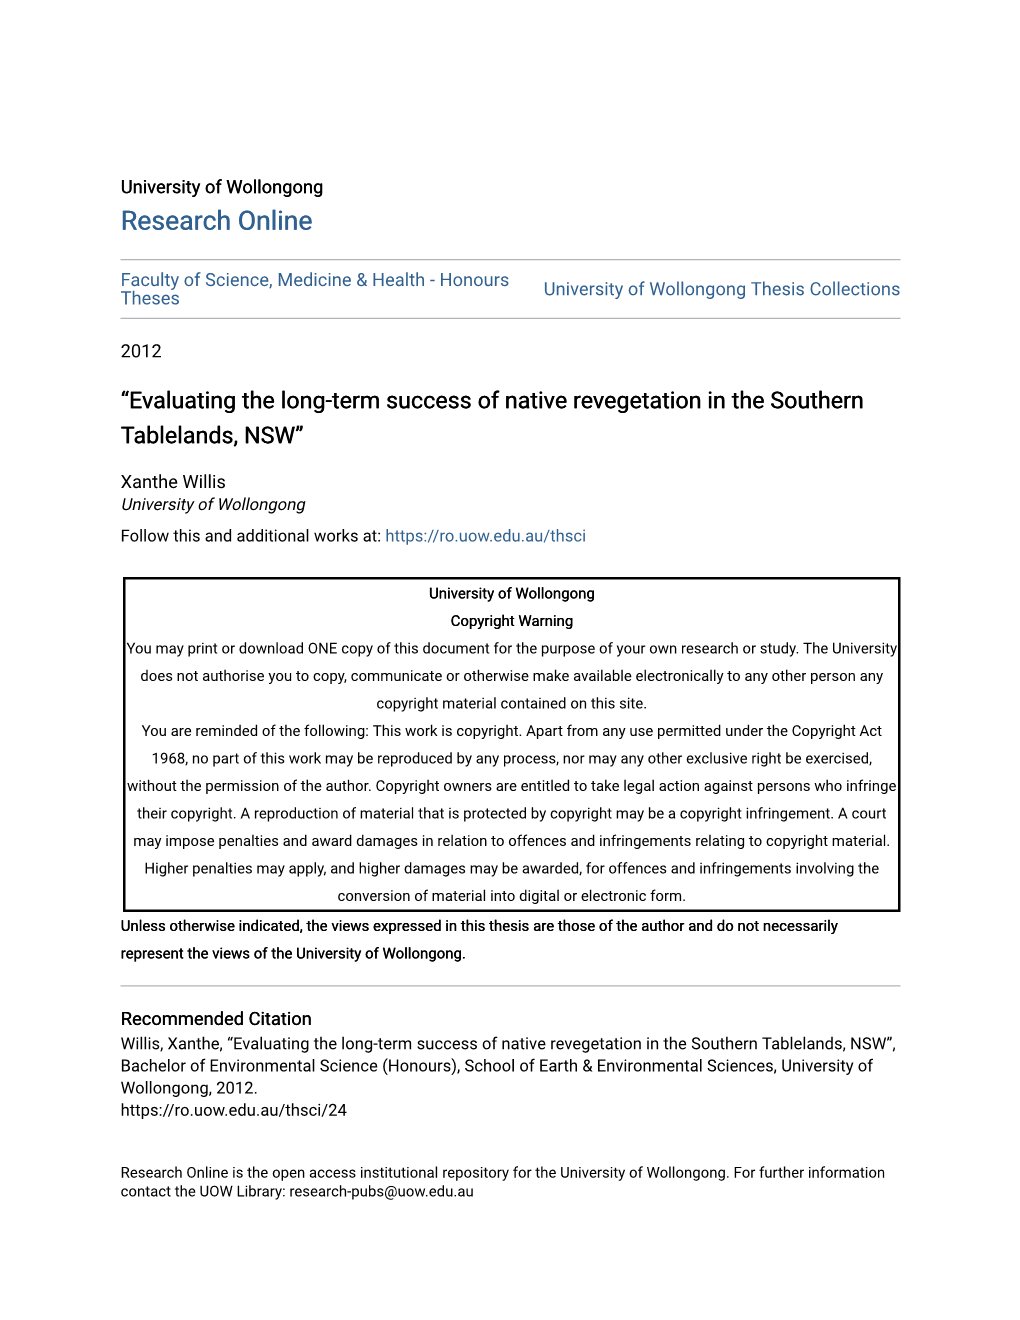 Evaluating the Long-Term Success of Native Revegetation in the Southern Tablelands, NSW”